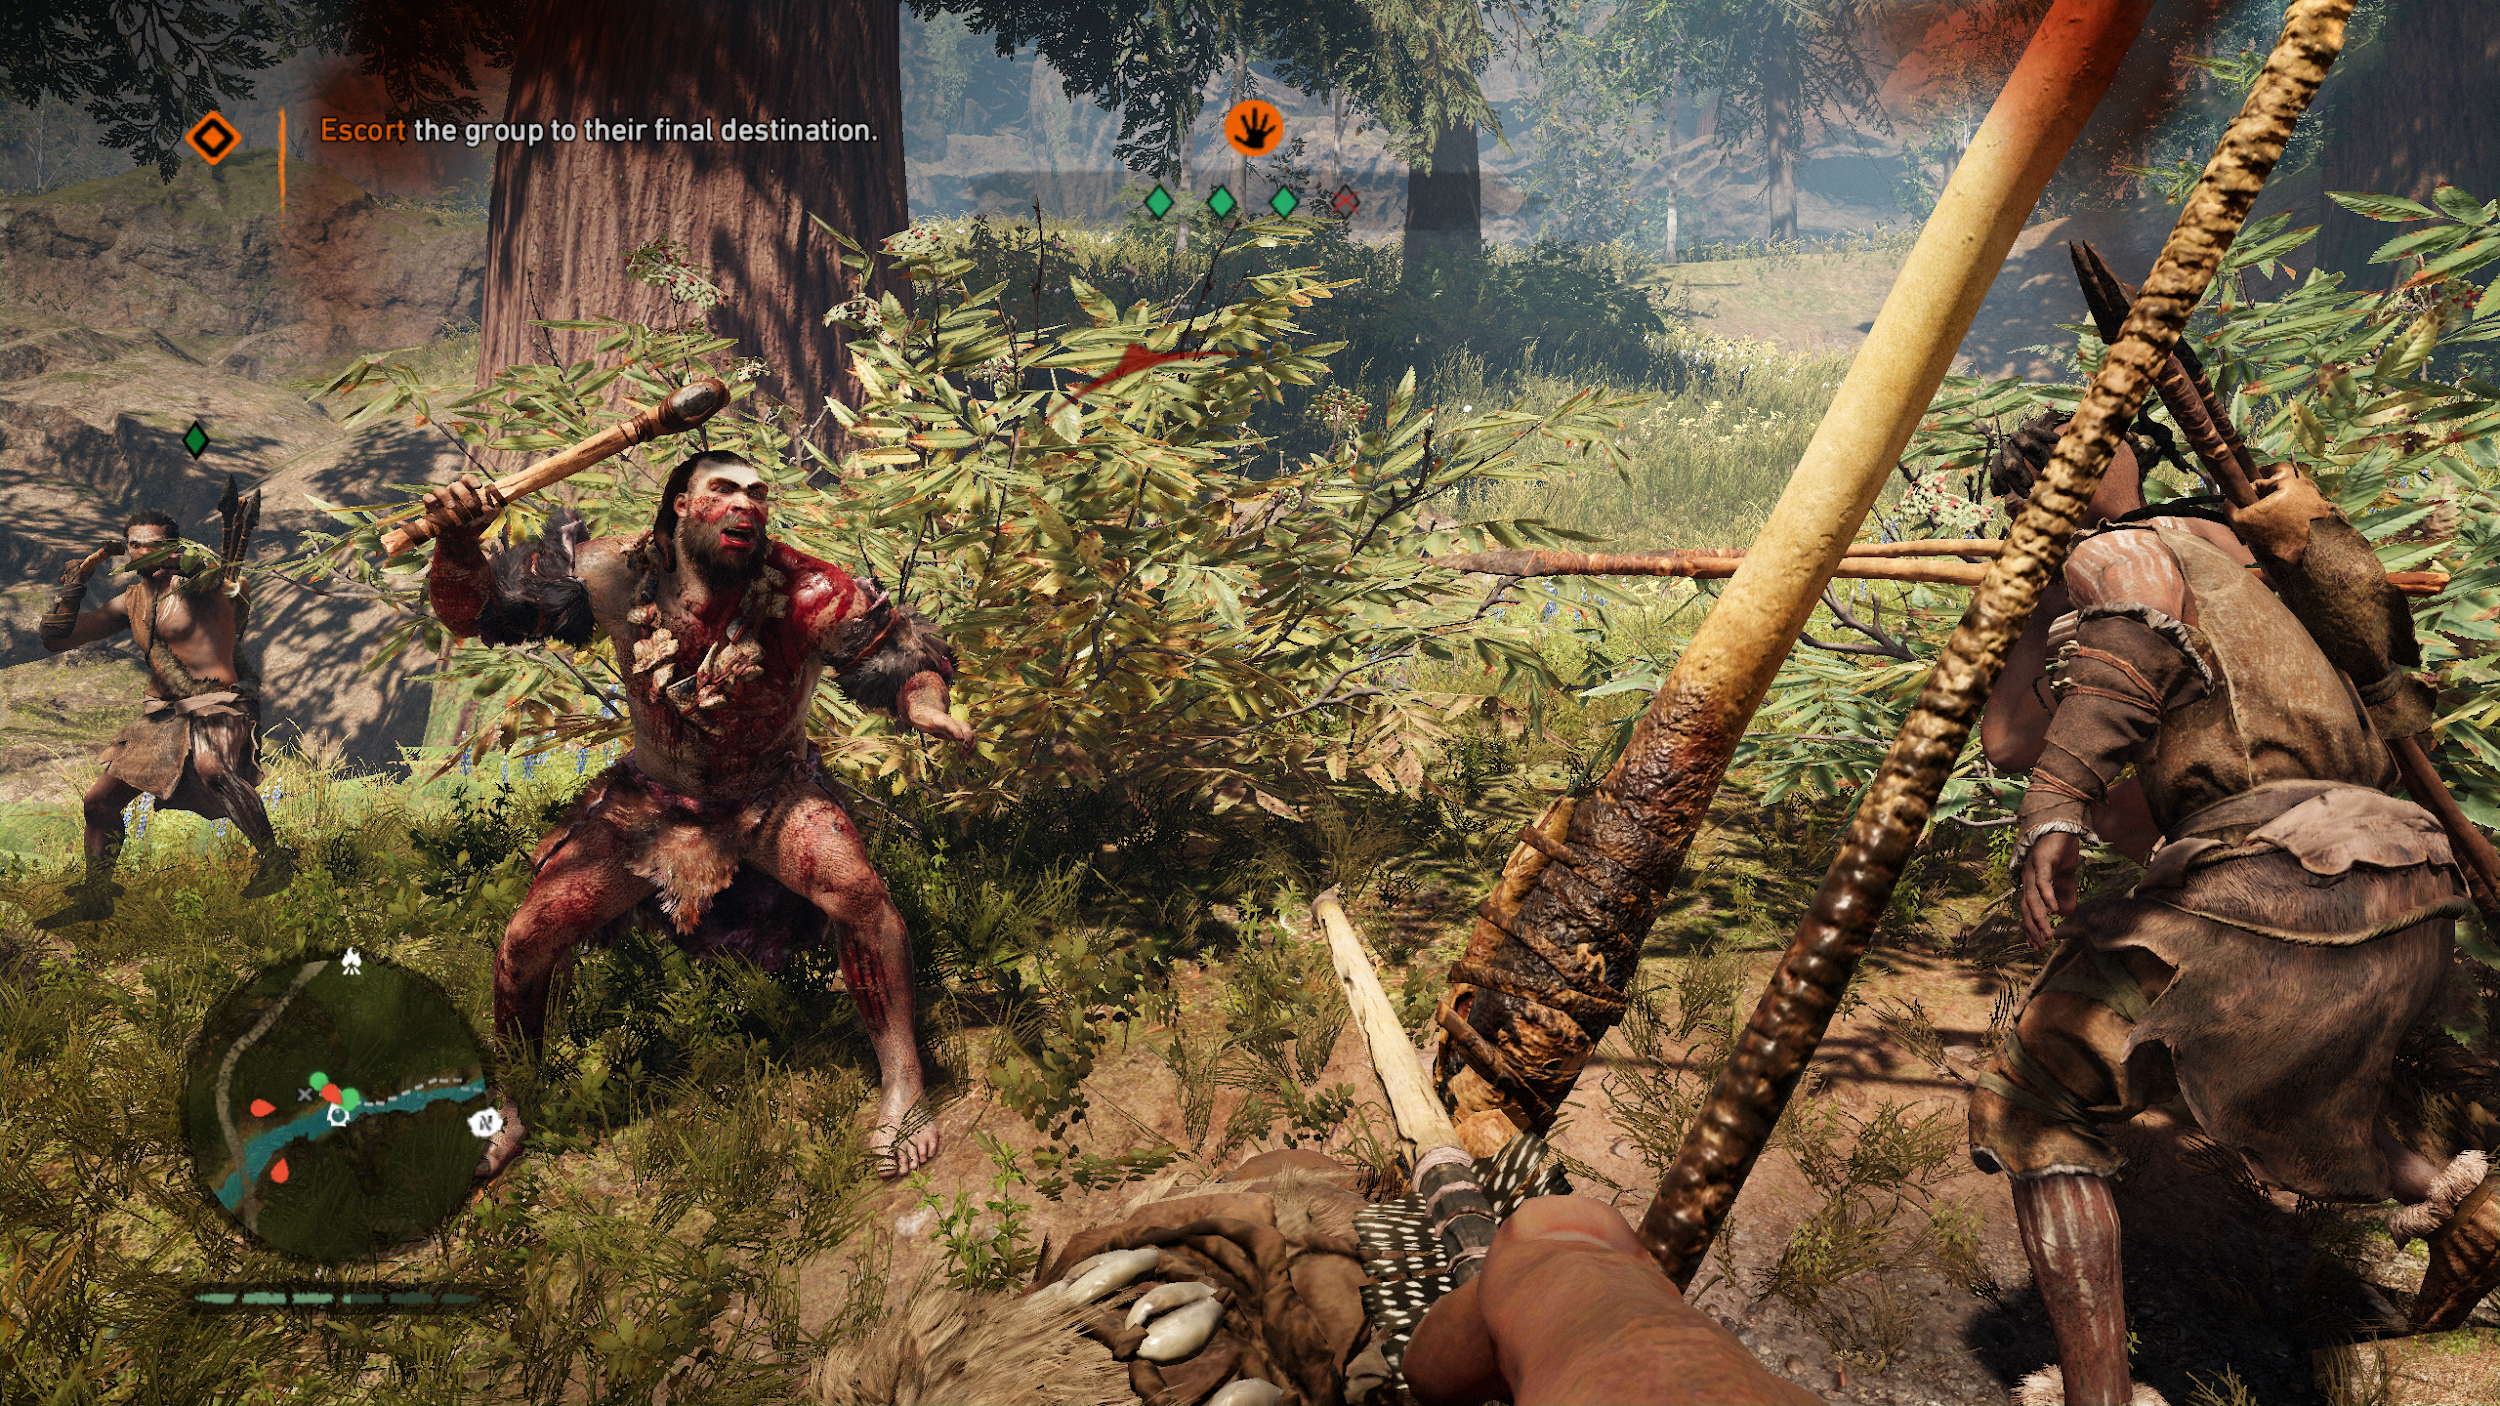 Screenshot of an action scene from the videogame Far Cry Primal.